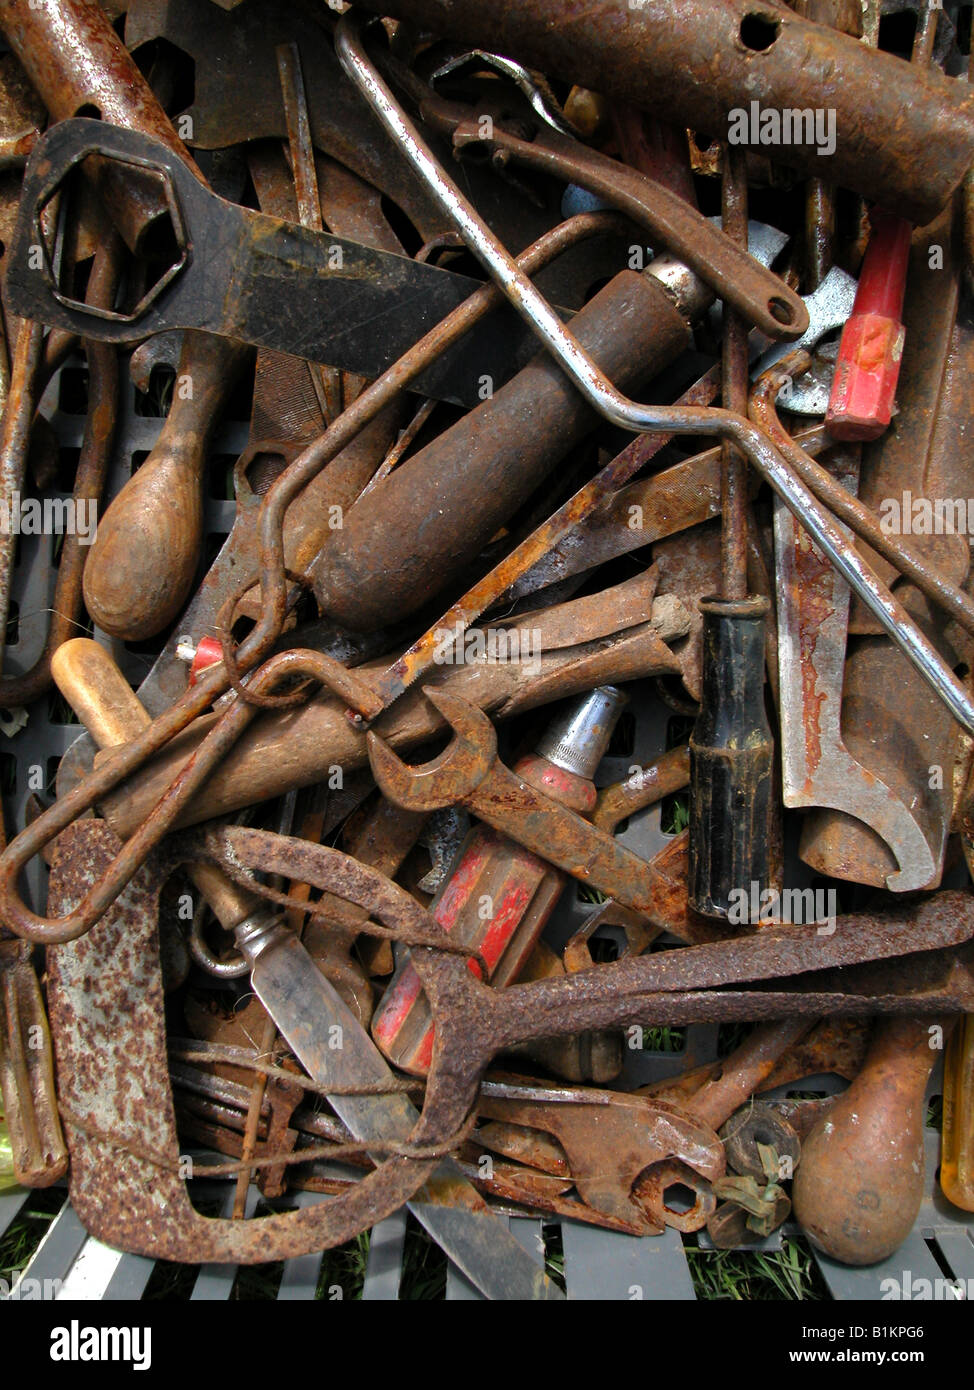 Box of rusty old tools for sale at boot fair. Including saws, knives, spanners, socket spanners and more. Stock Photo